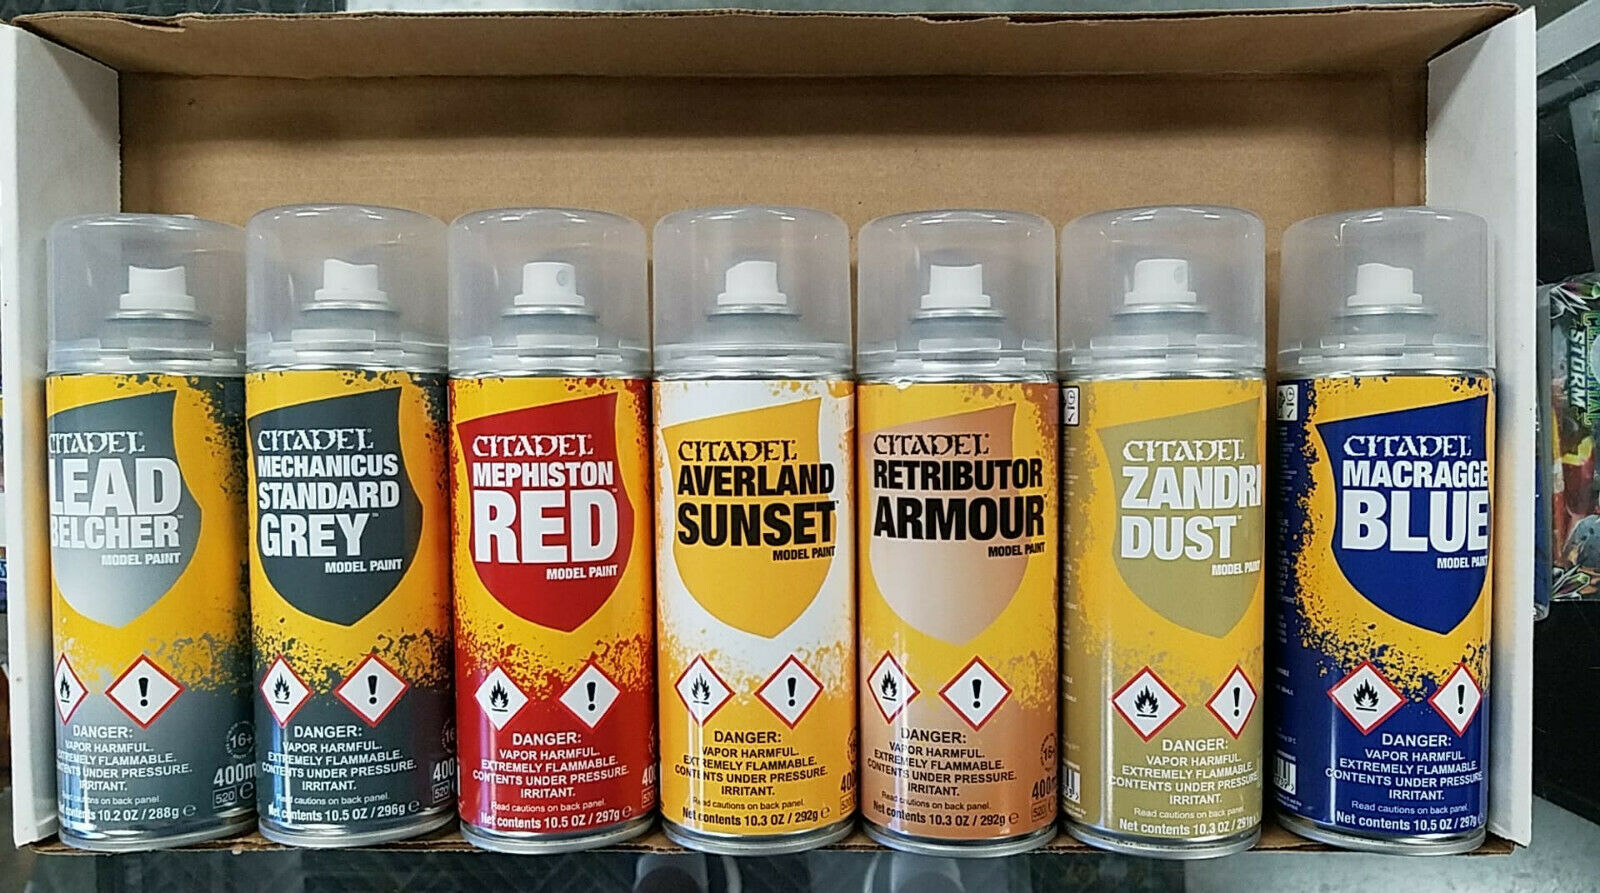 Citadel Spray Paint Cans 400ml - Games Workshop - Warhammer 40k - All Colors!